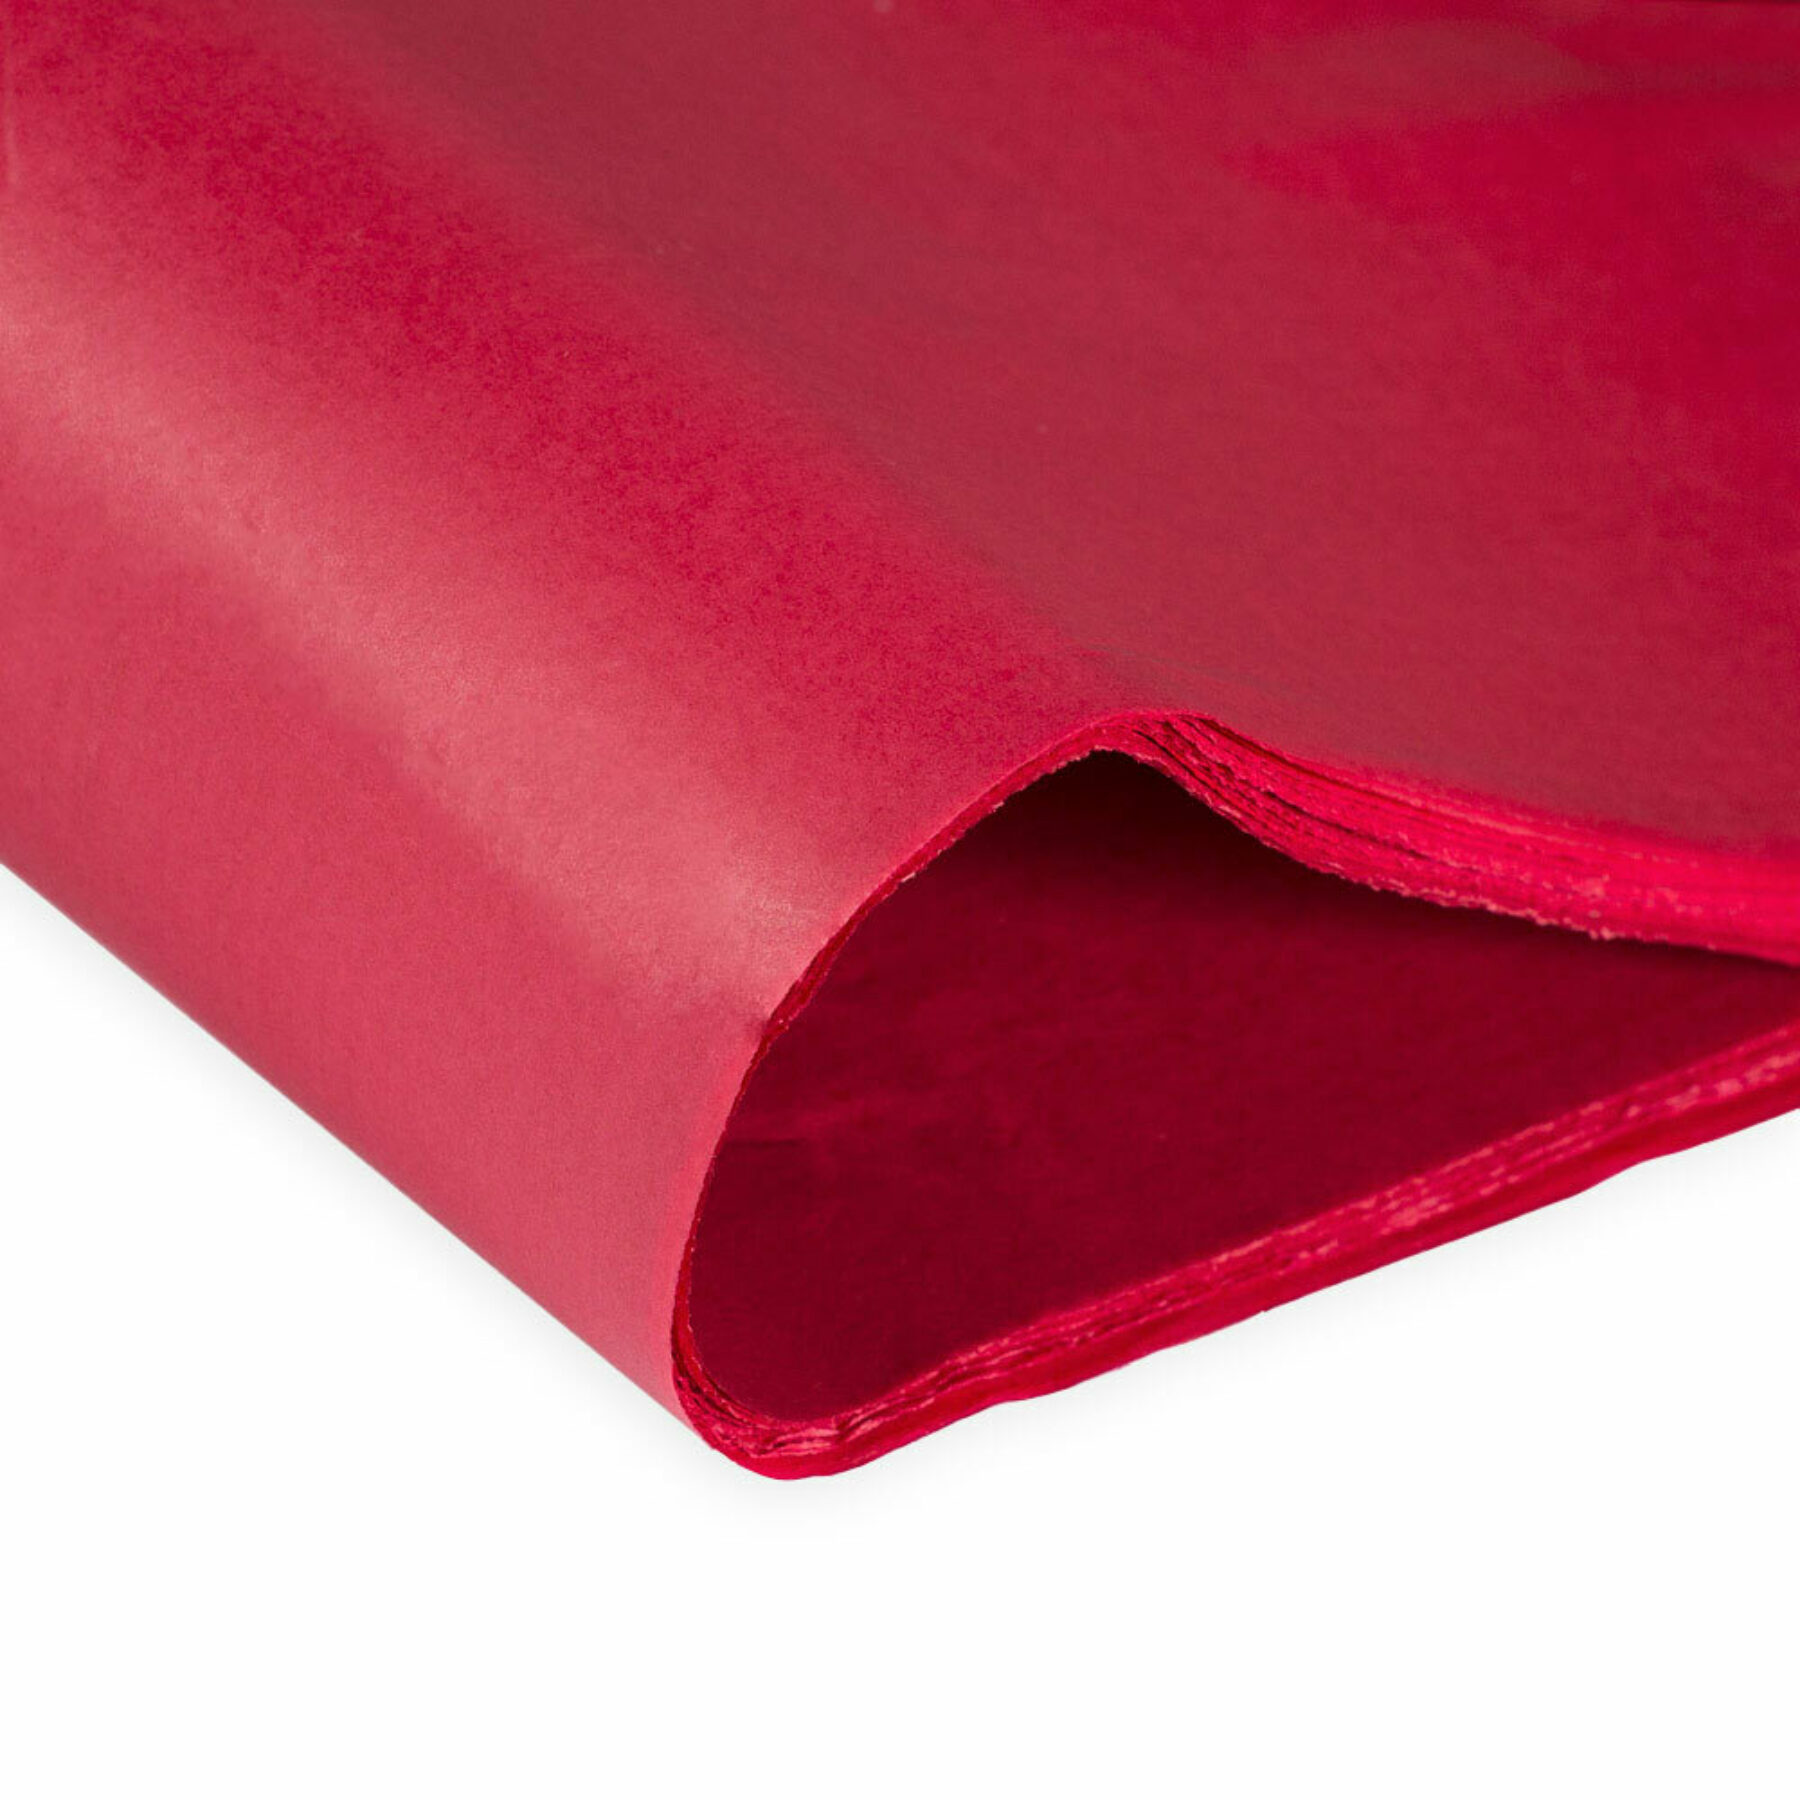 PA065 Red Tissue Paper (480 sheets)